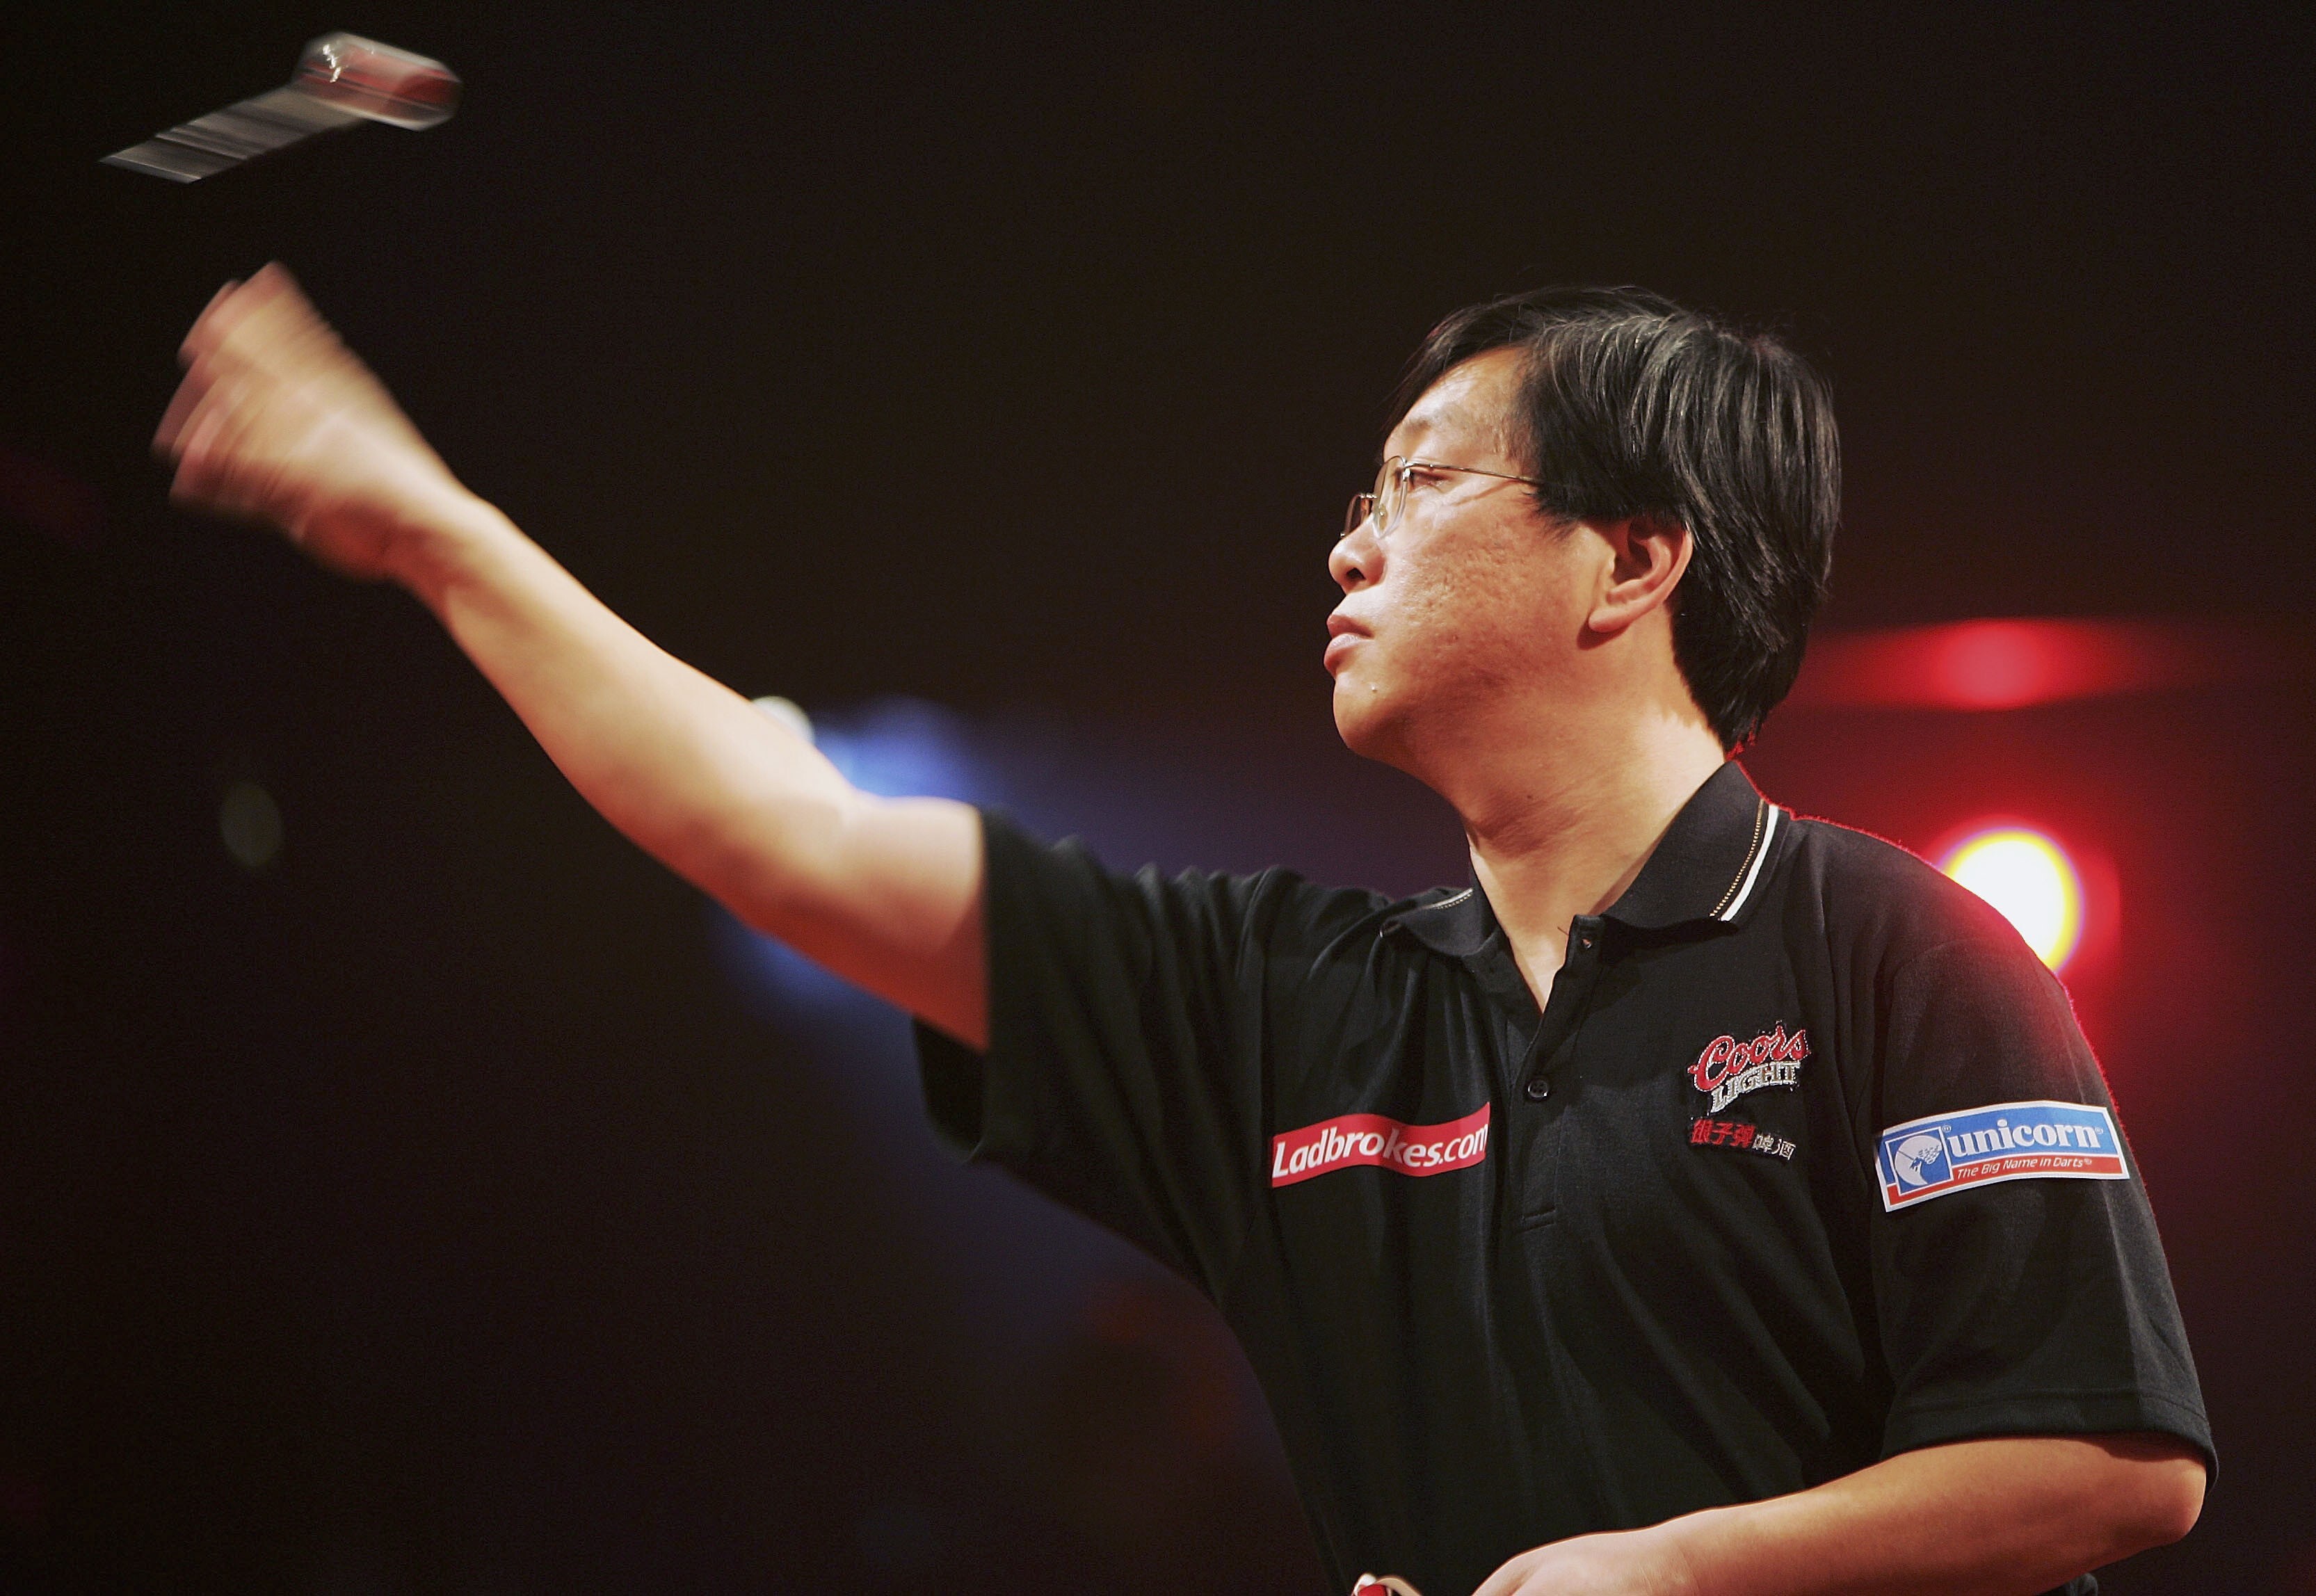 China’s Liu Chengan has qualified for the World Darts Championship for the second time. In the 2005-06 edition, he was eliminated by John Part of Canada. Photo: Bryn Lennon/Getty Images